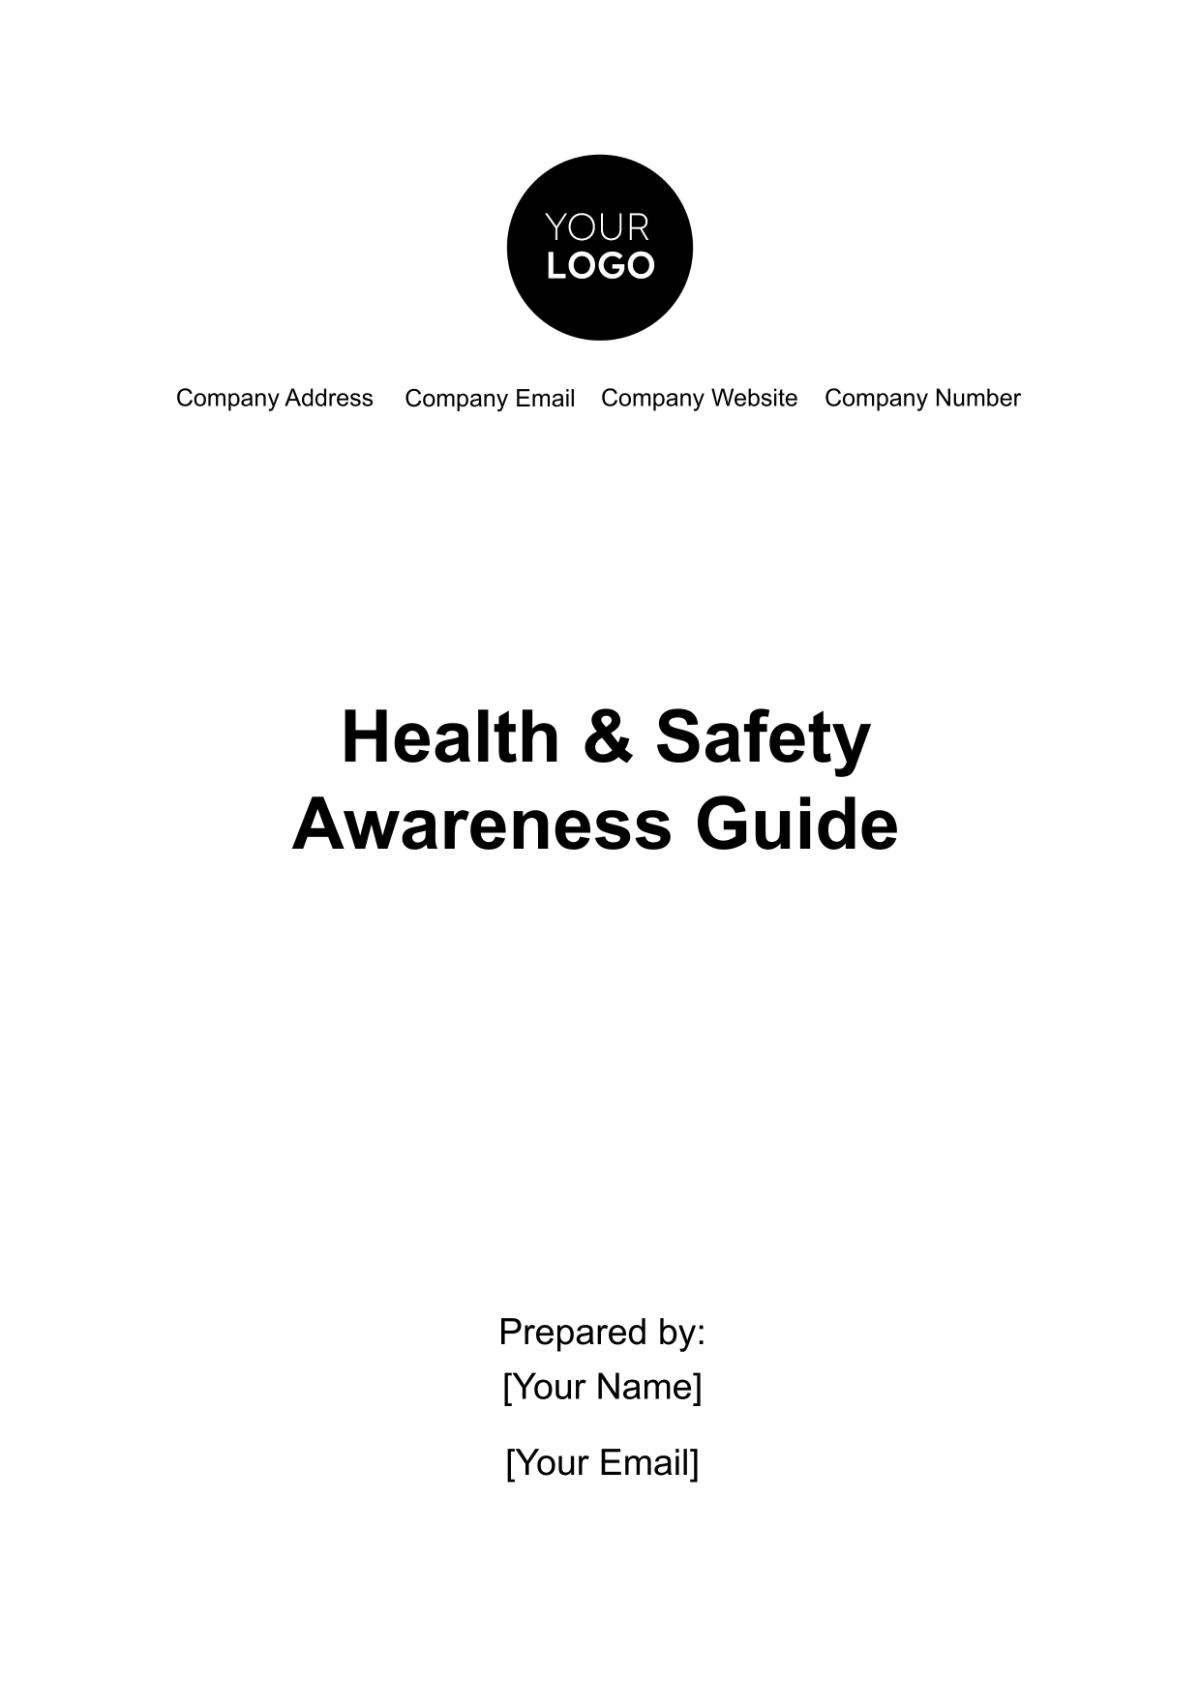 Health & Safety Awareness Guide Template